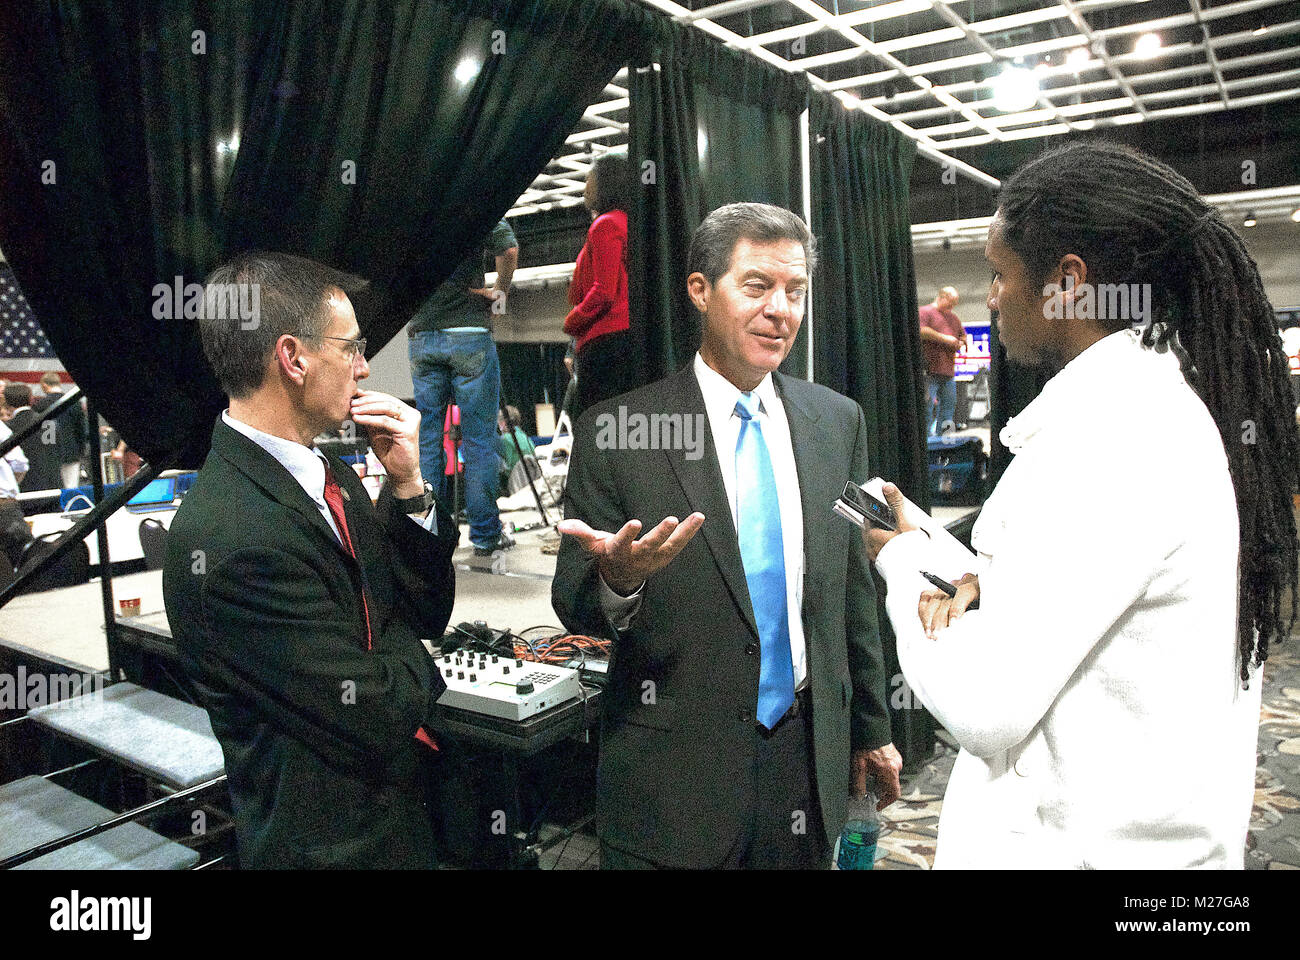 Topeka, Kansas, USA, 4th November, 2014 Newly re-elected Kansas Governor Sam Brownback at the Republican party victory watch party in Topeka. Standing by the Governor while he talks with reporter John Eligon of the NYT is his spokesperson John Milburn. Stock Photo